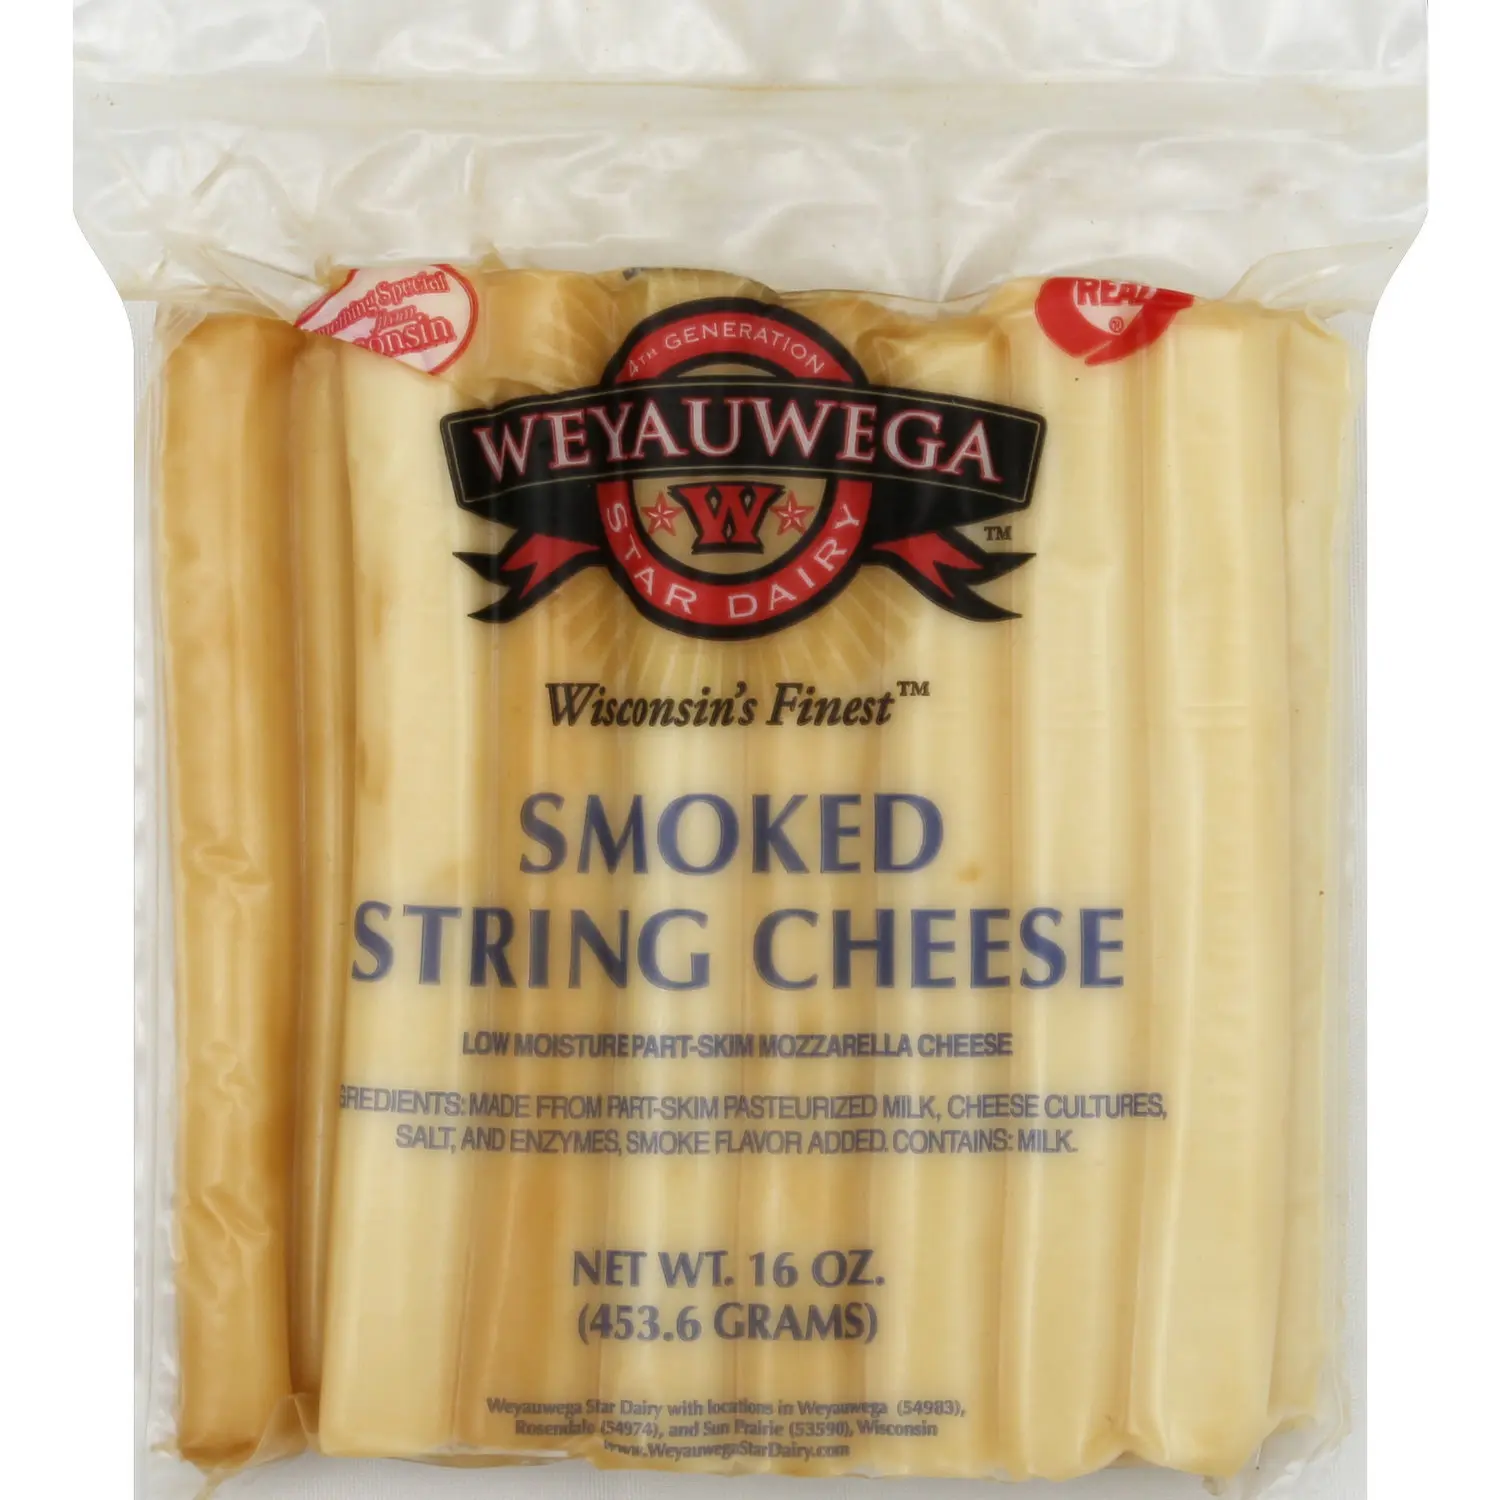 smoked string cheese near me - Is smoked string cheese healthy